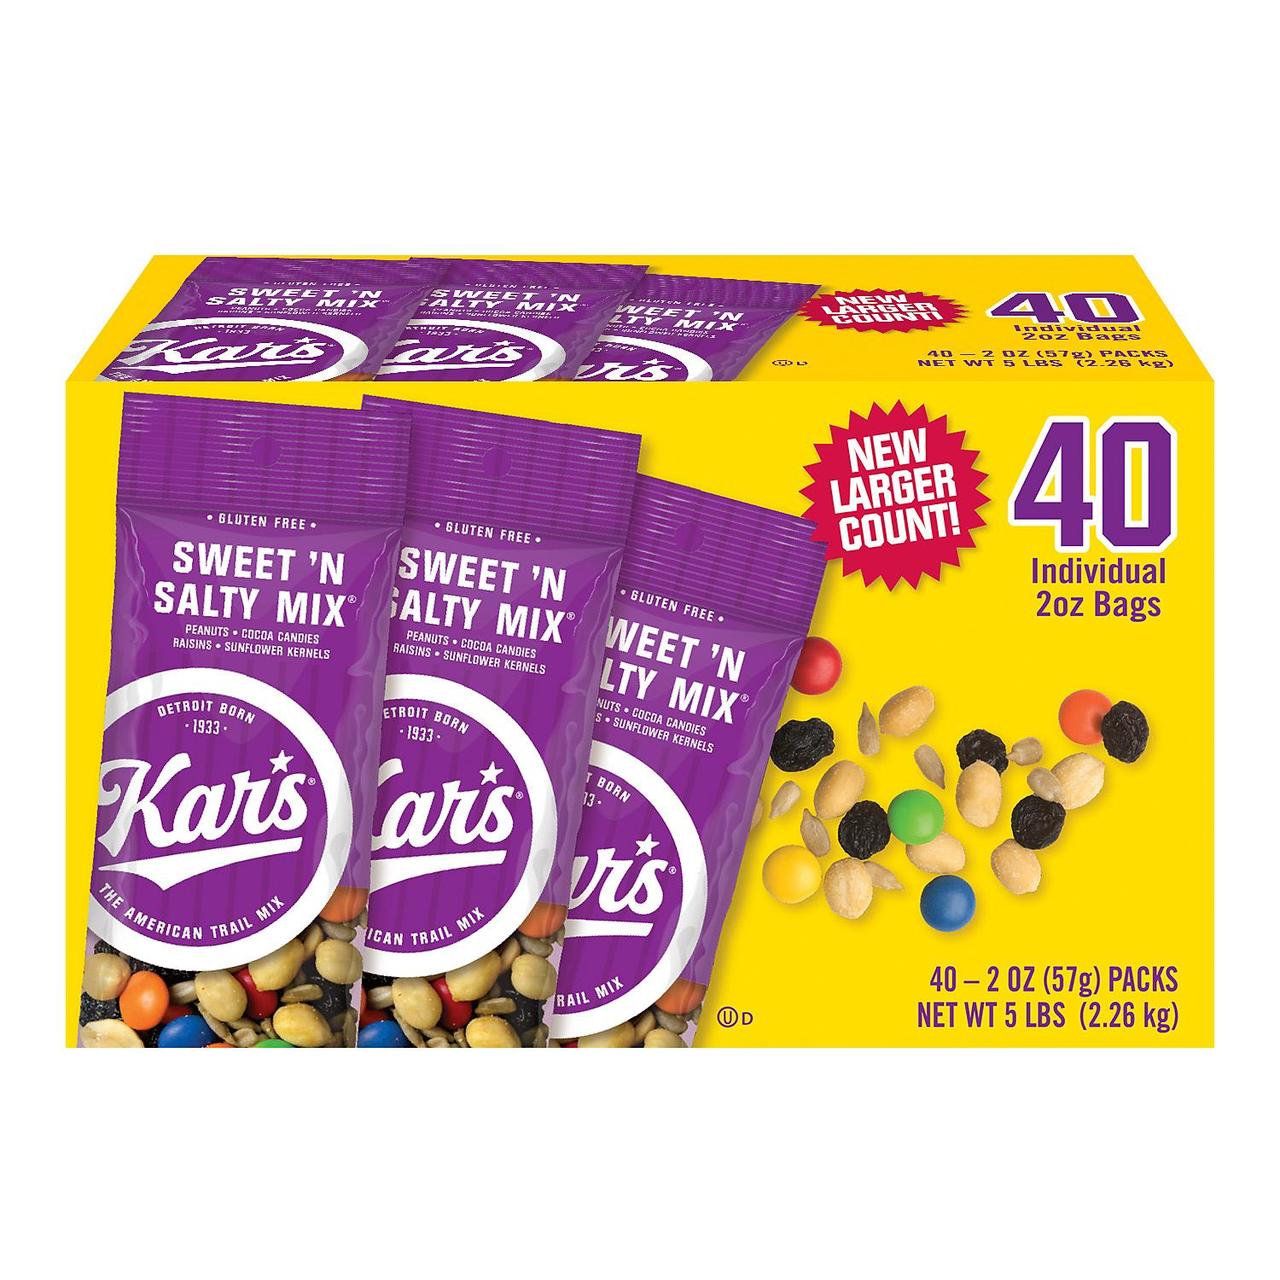 Product Of Kar'S Sweet 'N Salty Mix (40 Ct.) - For Vending Machine, Schools , parties, Retail Stores